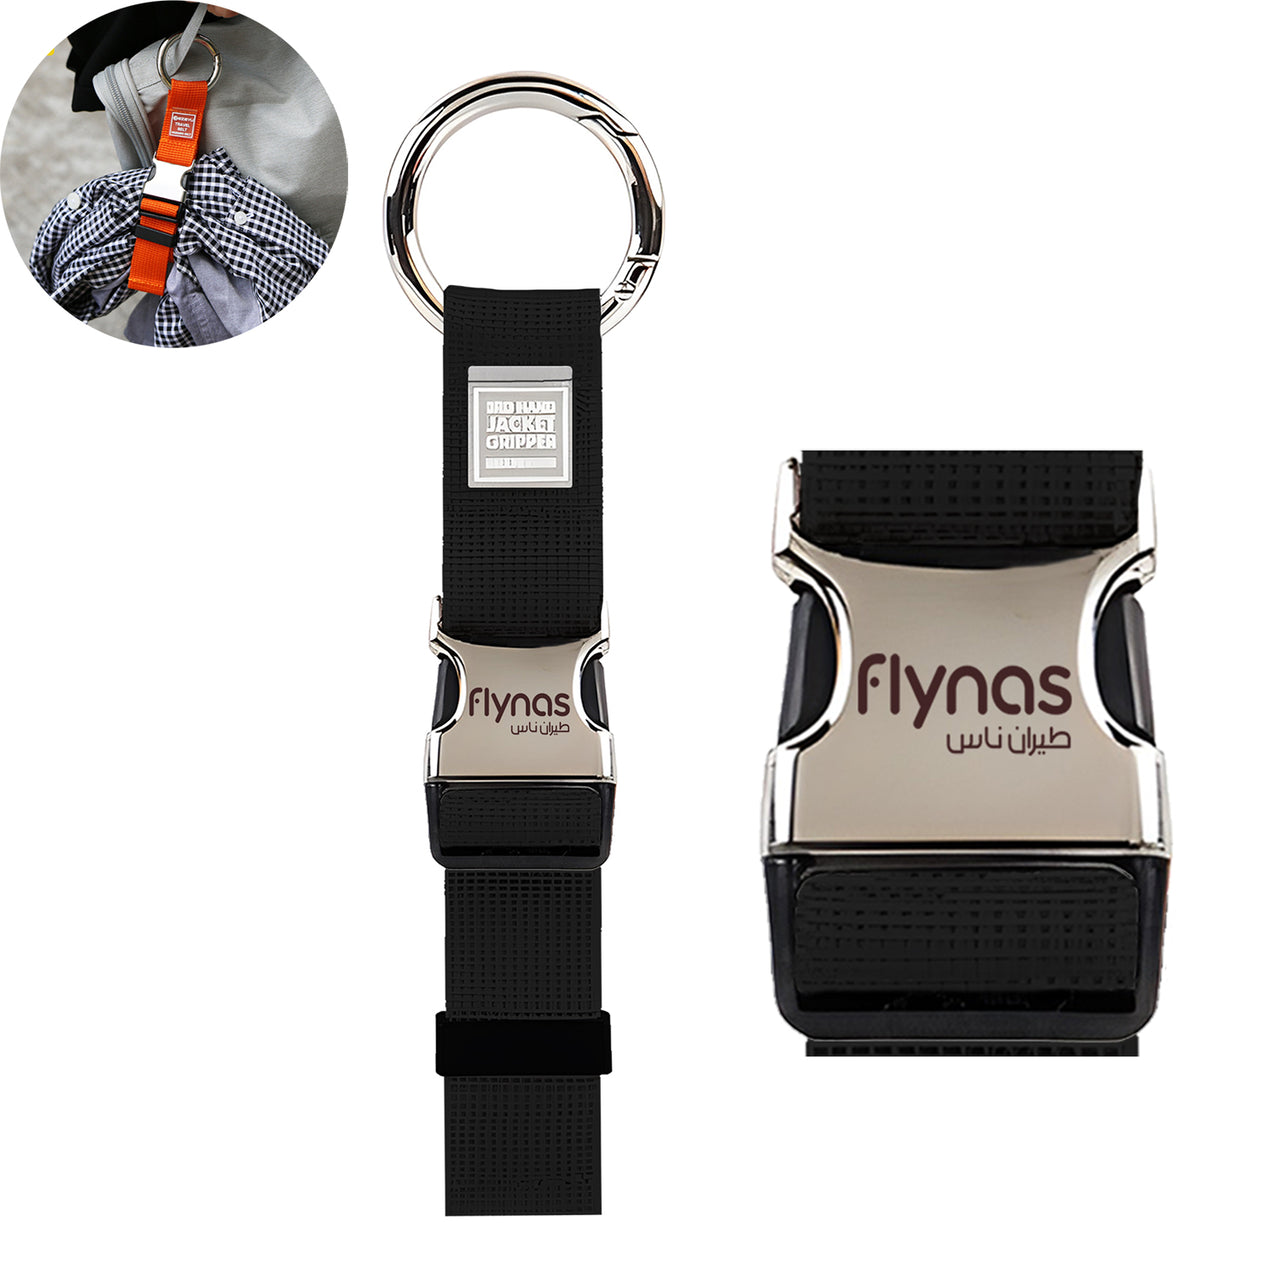 Flynas Airlines Designed Portable Luggage Strap Jacket Gripper